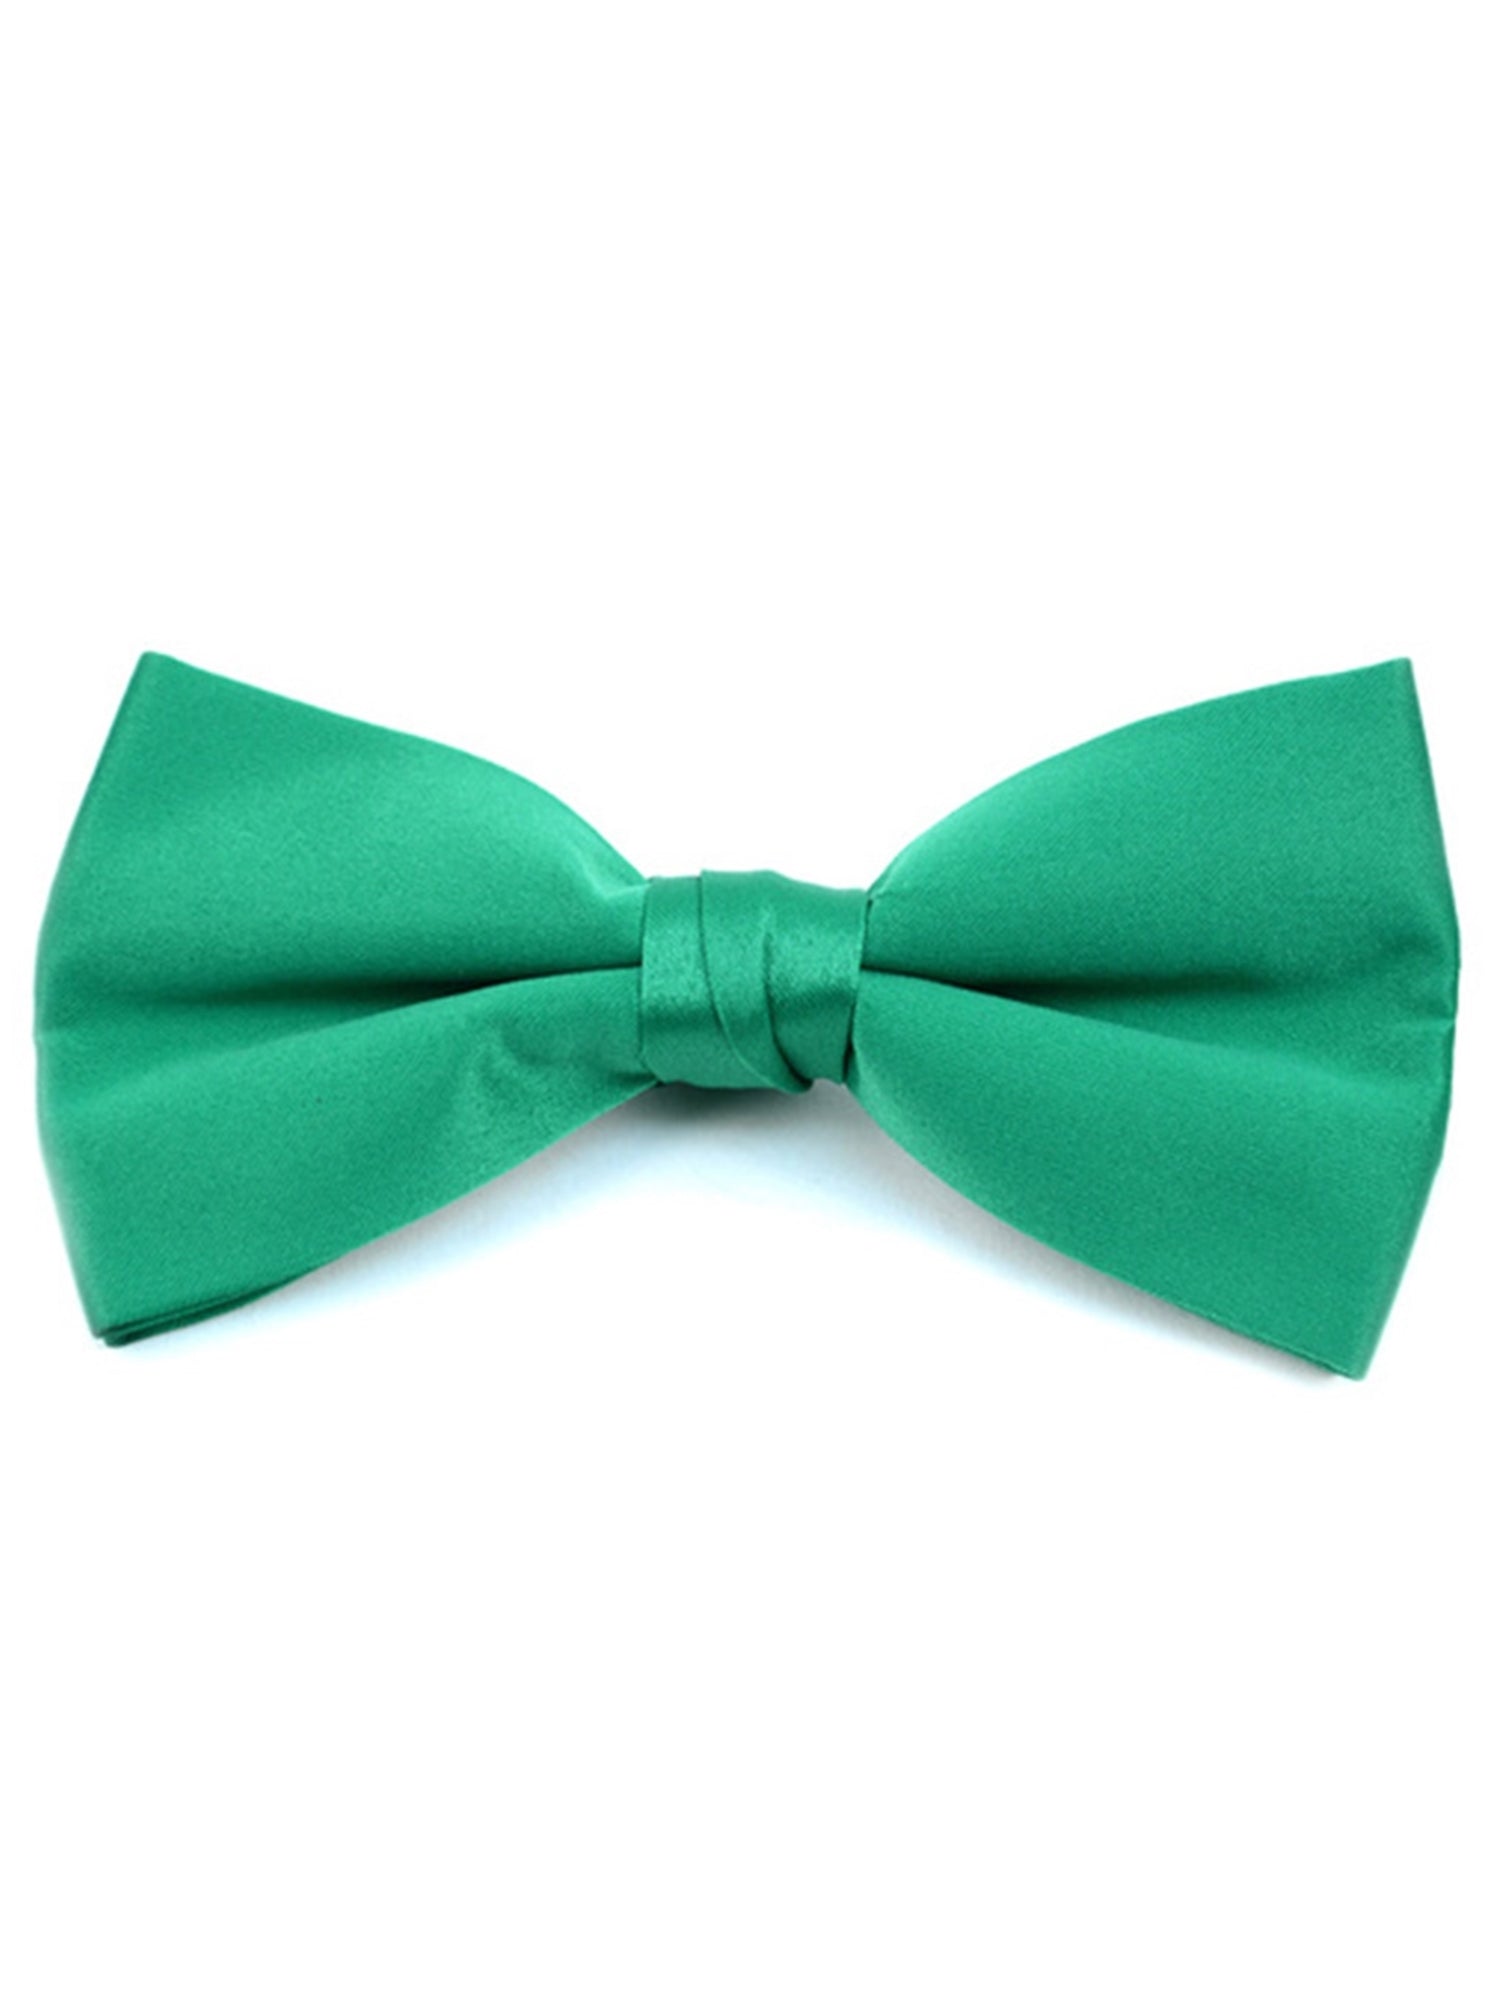 Young Boy's Pre-tied Clip On Bow Tie - Formal Tuxedo Solid Color Boy's Solid Color Bow Tie TheDapperTie Green One Size 